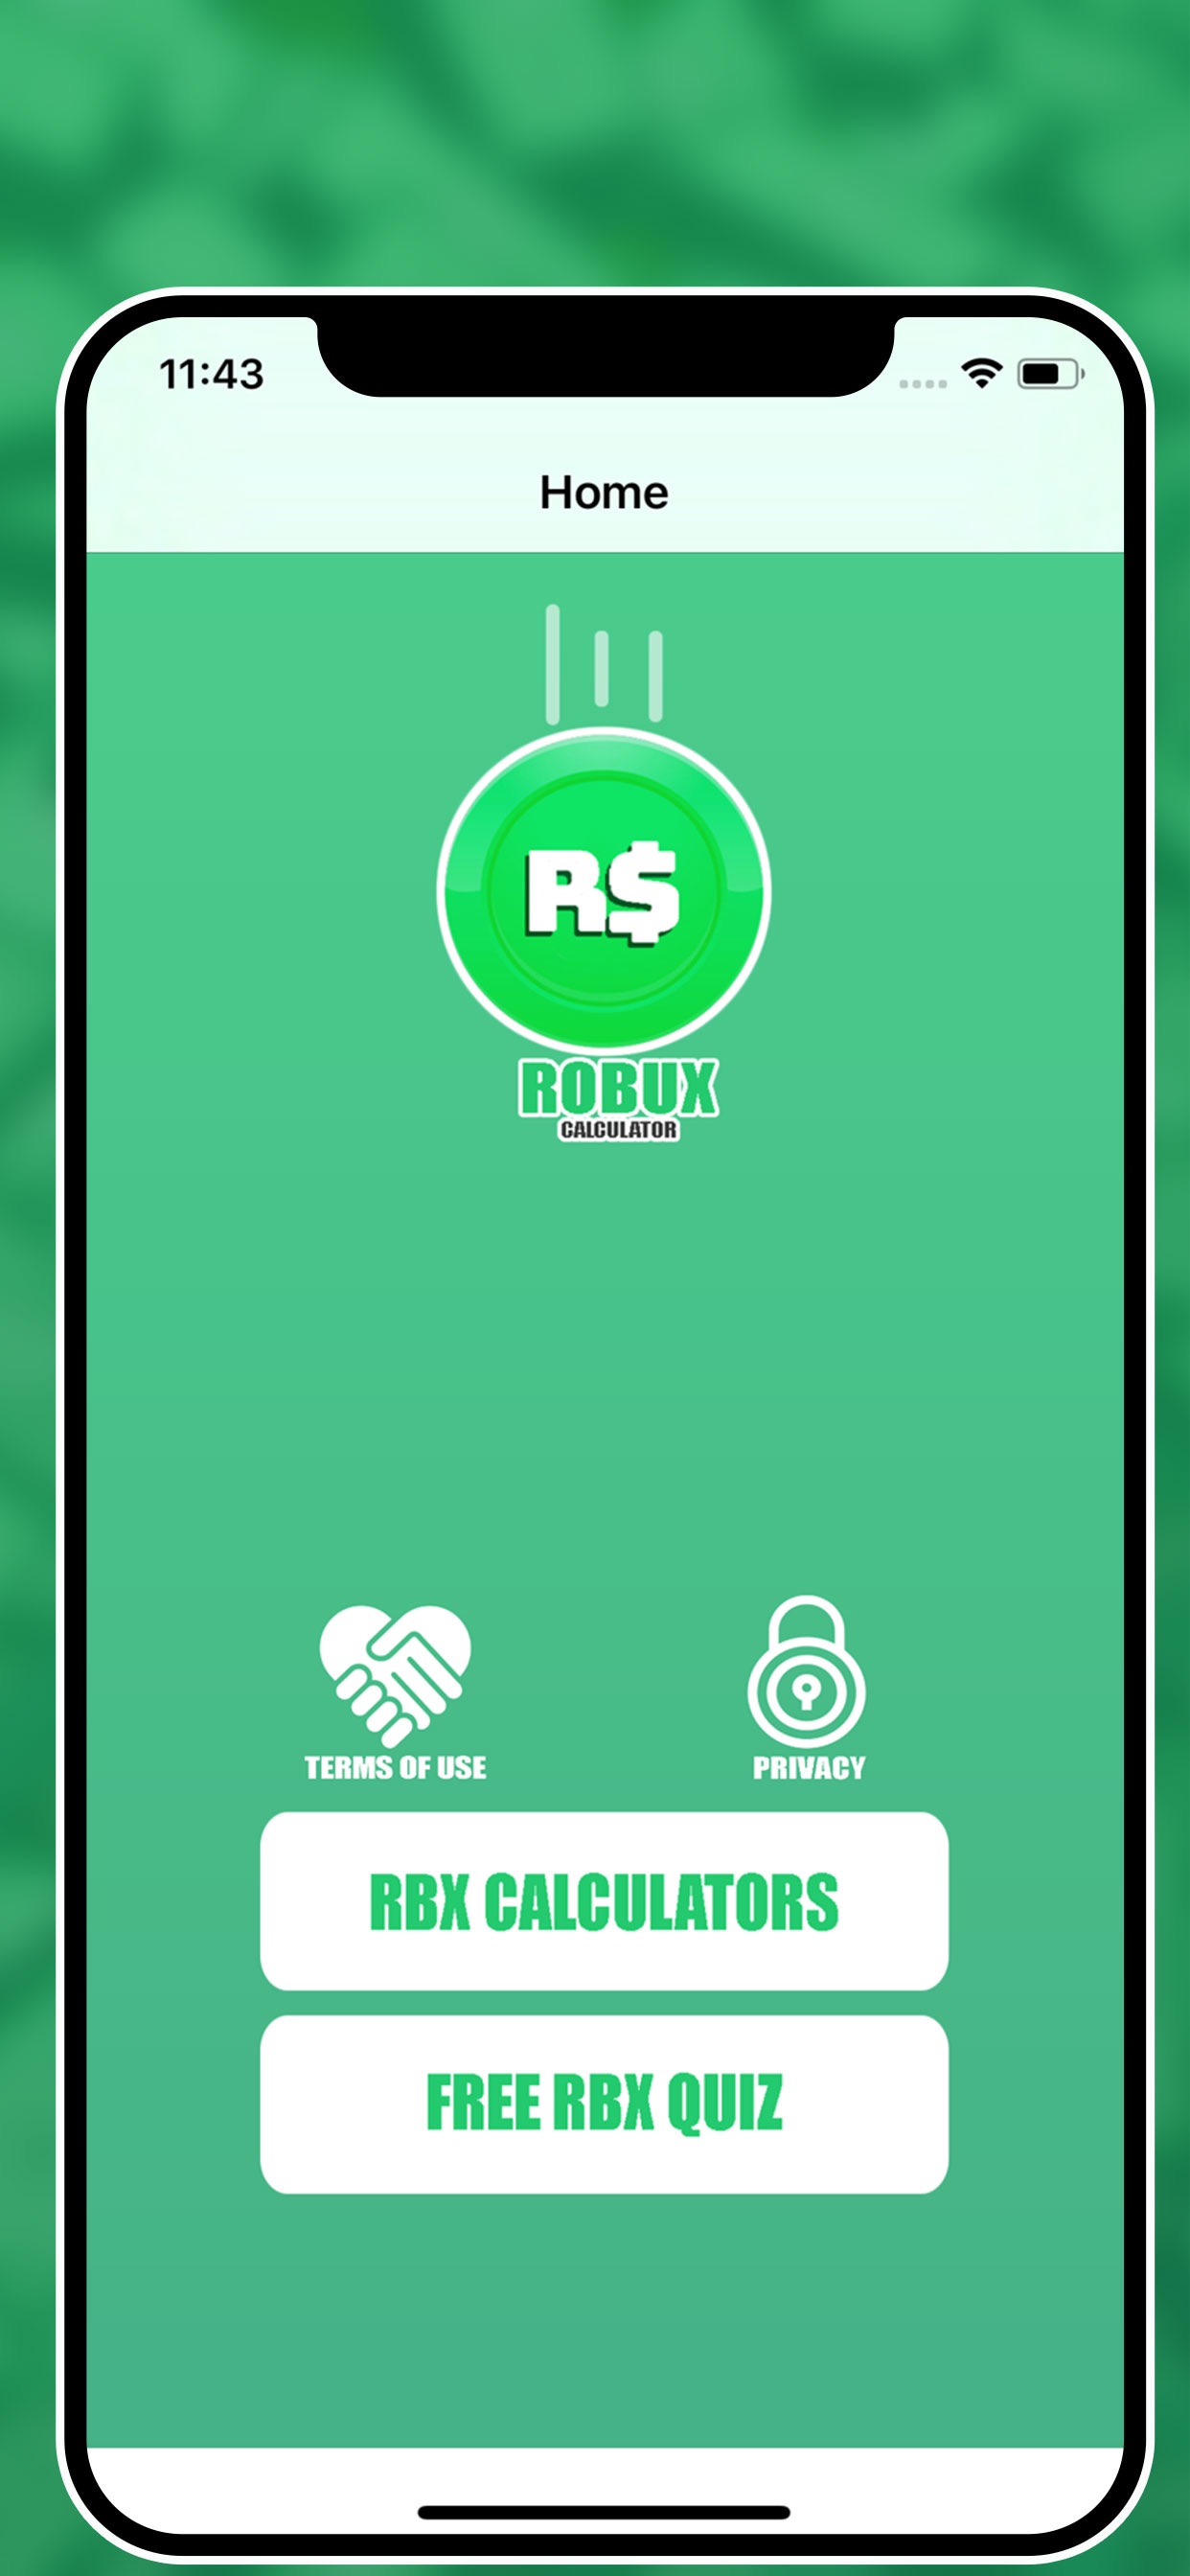 Robux Calculator For Rblox App Store Review Aso Revenue Downloads Appfollow - robux calculator for rblox by jamal bouzidi